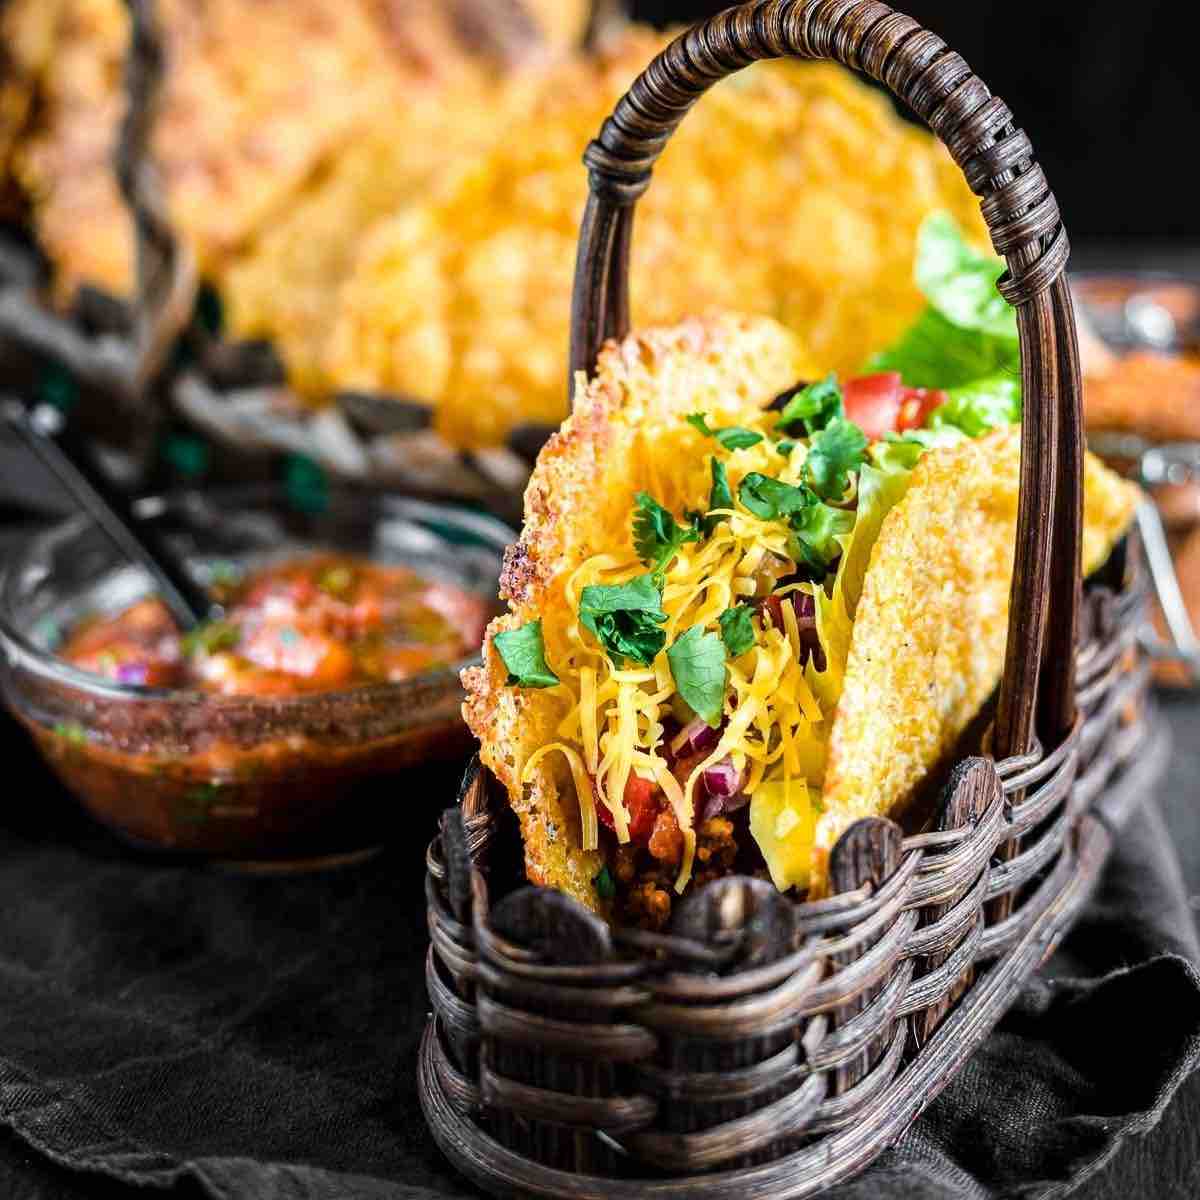 Homemade Keto Tacos in a brown basket